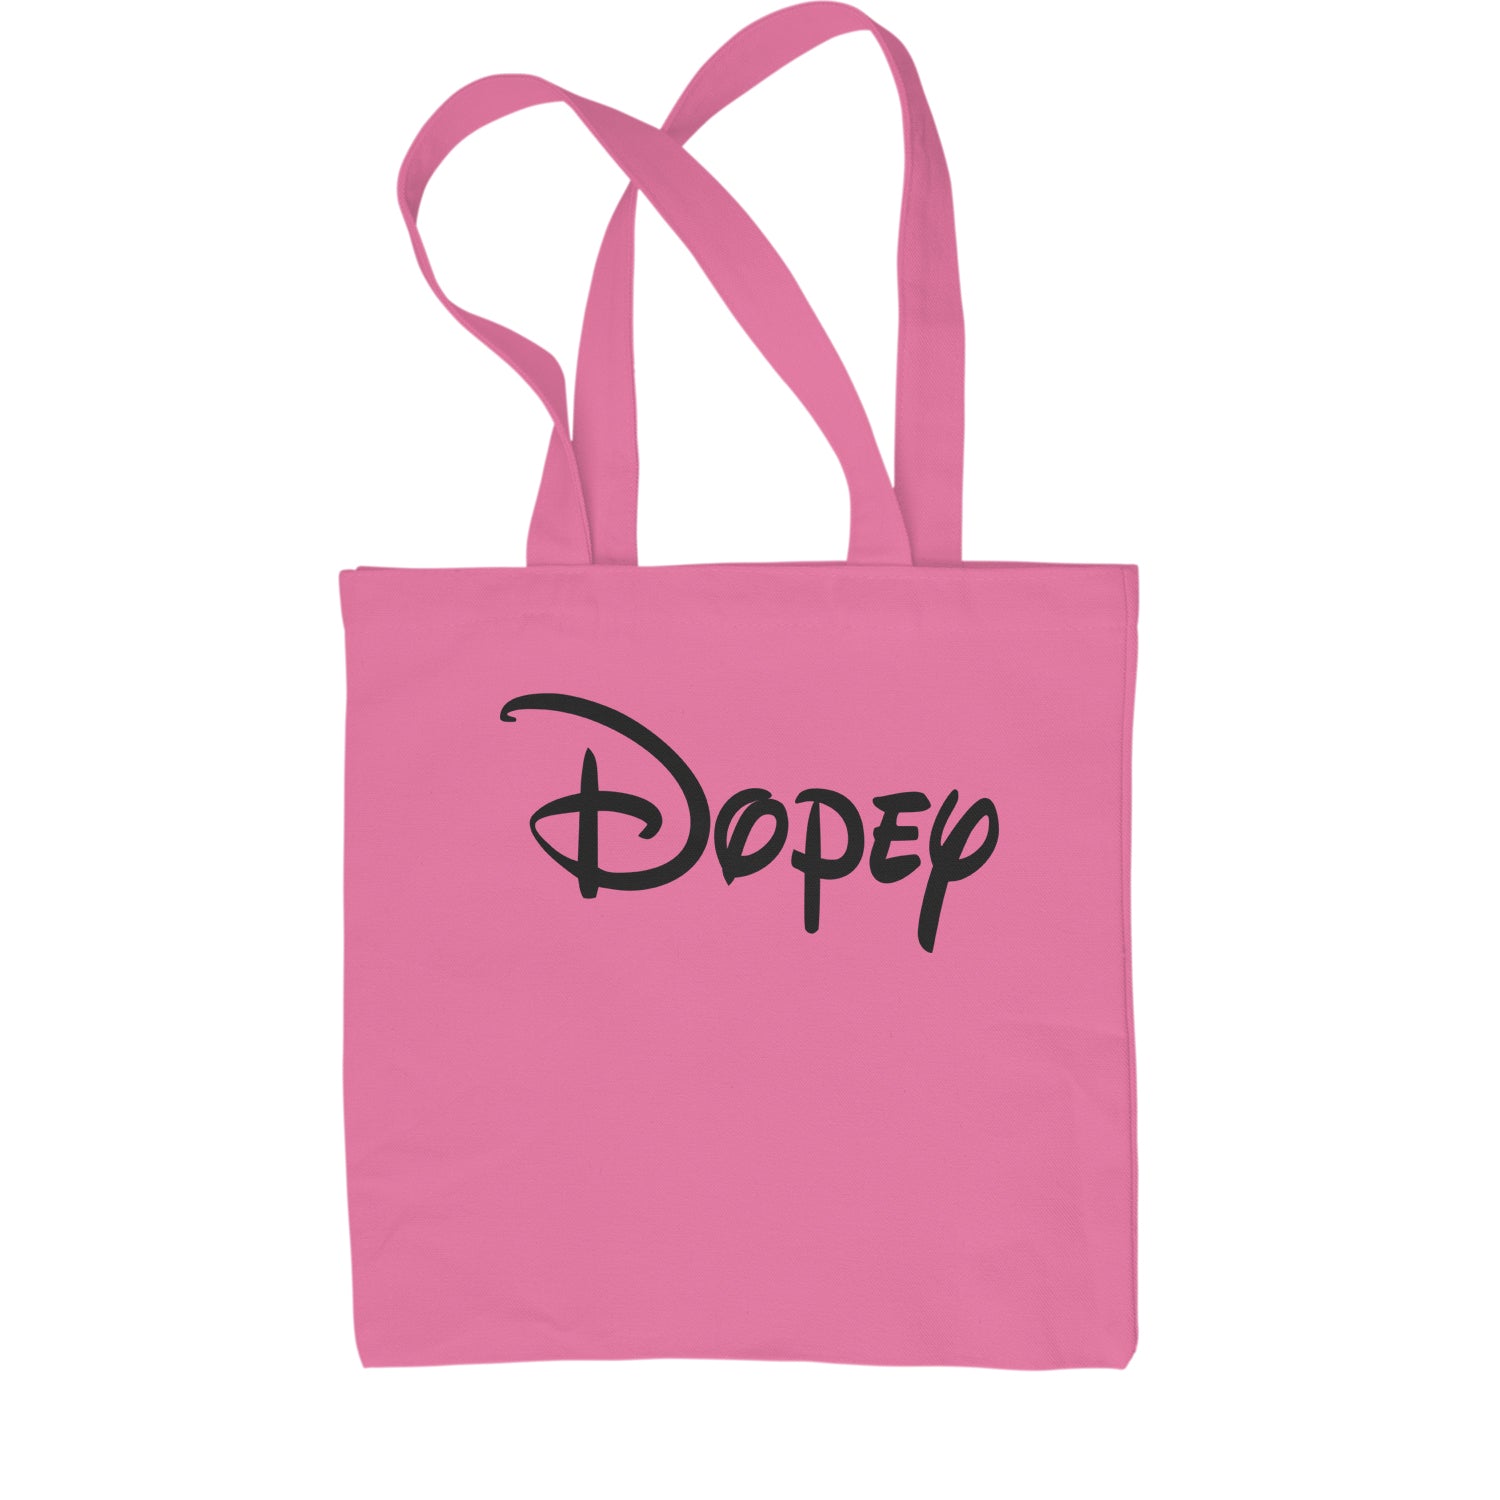 Dopey - 7 Dwarfs Costume Shopping Tote Bag and, costume, dwarfs, group, halloween, matching, seven, snow, the, white by Expression Tees